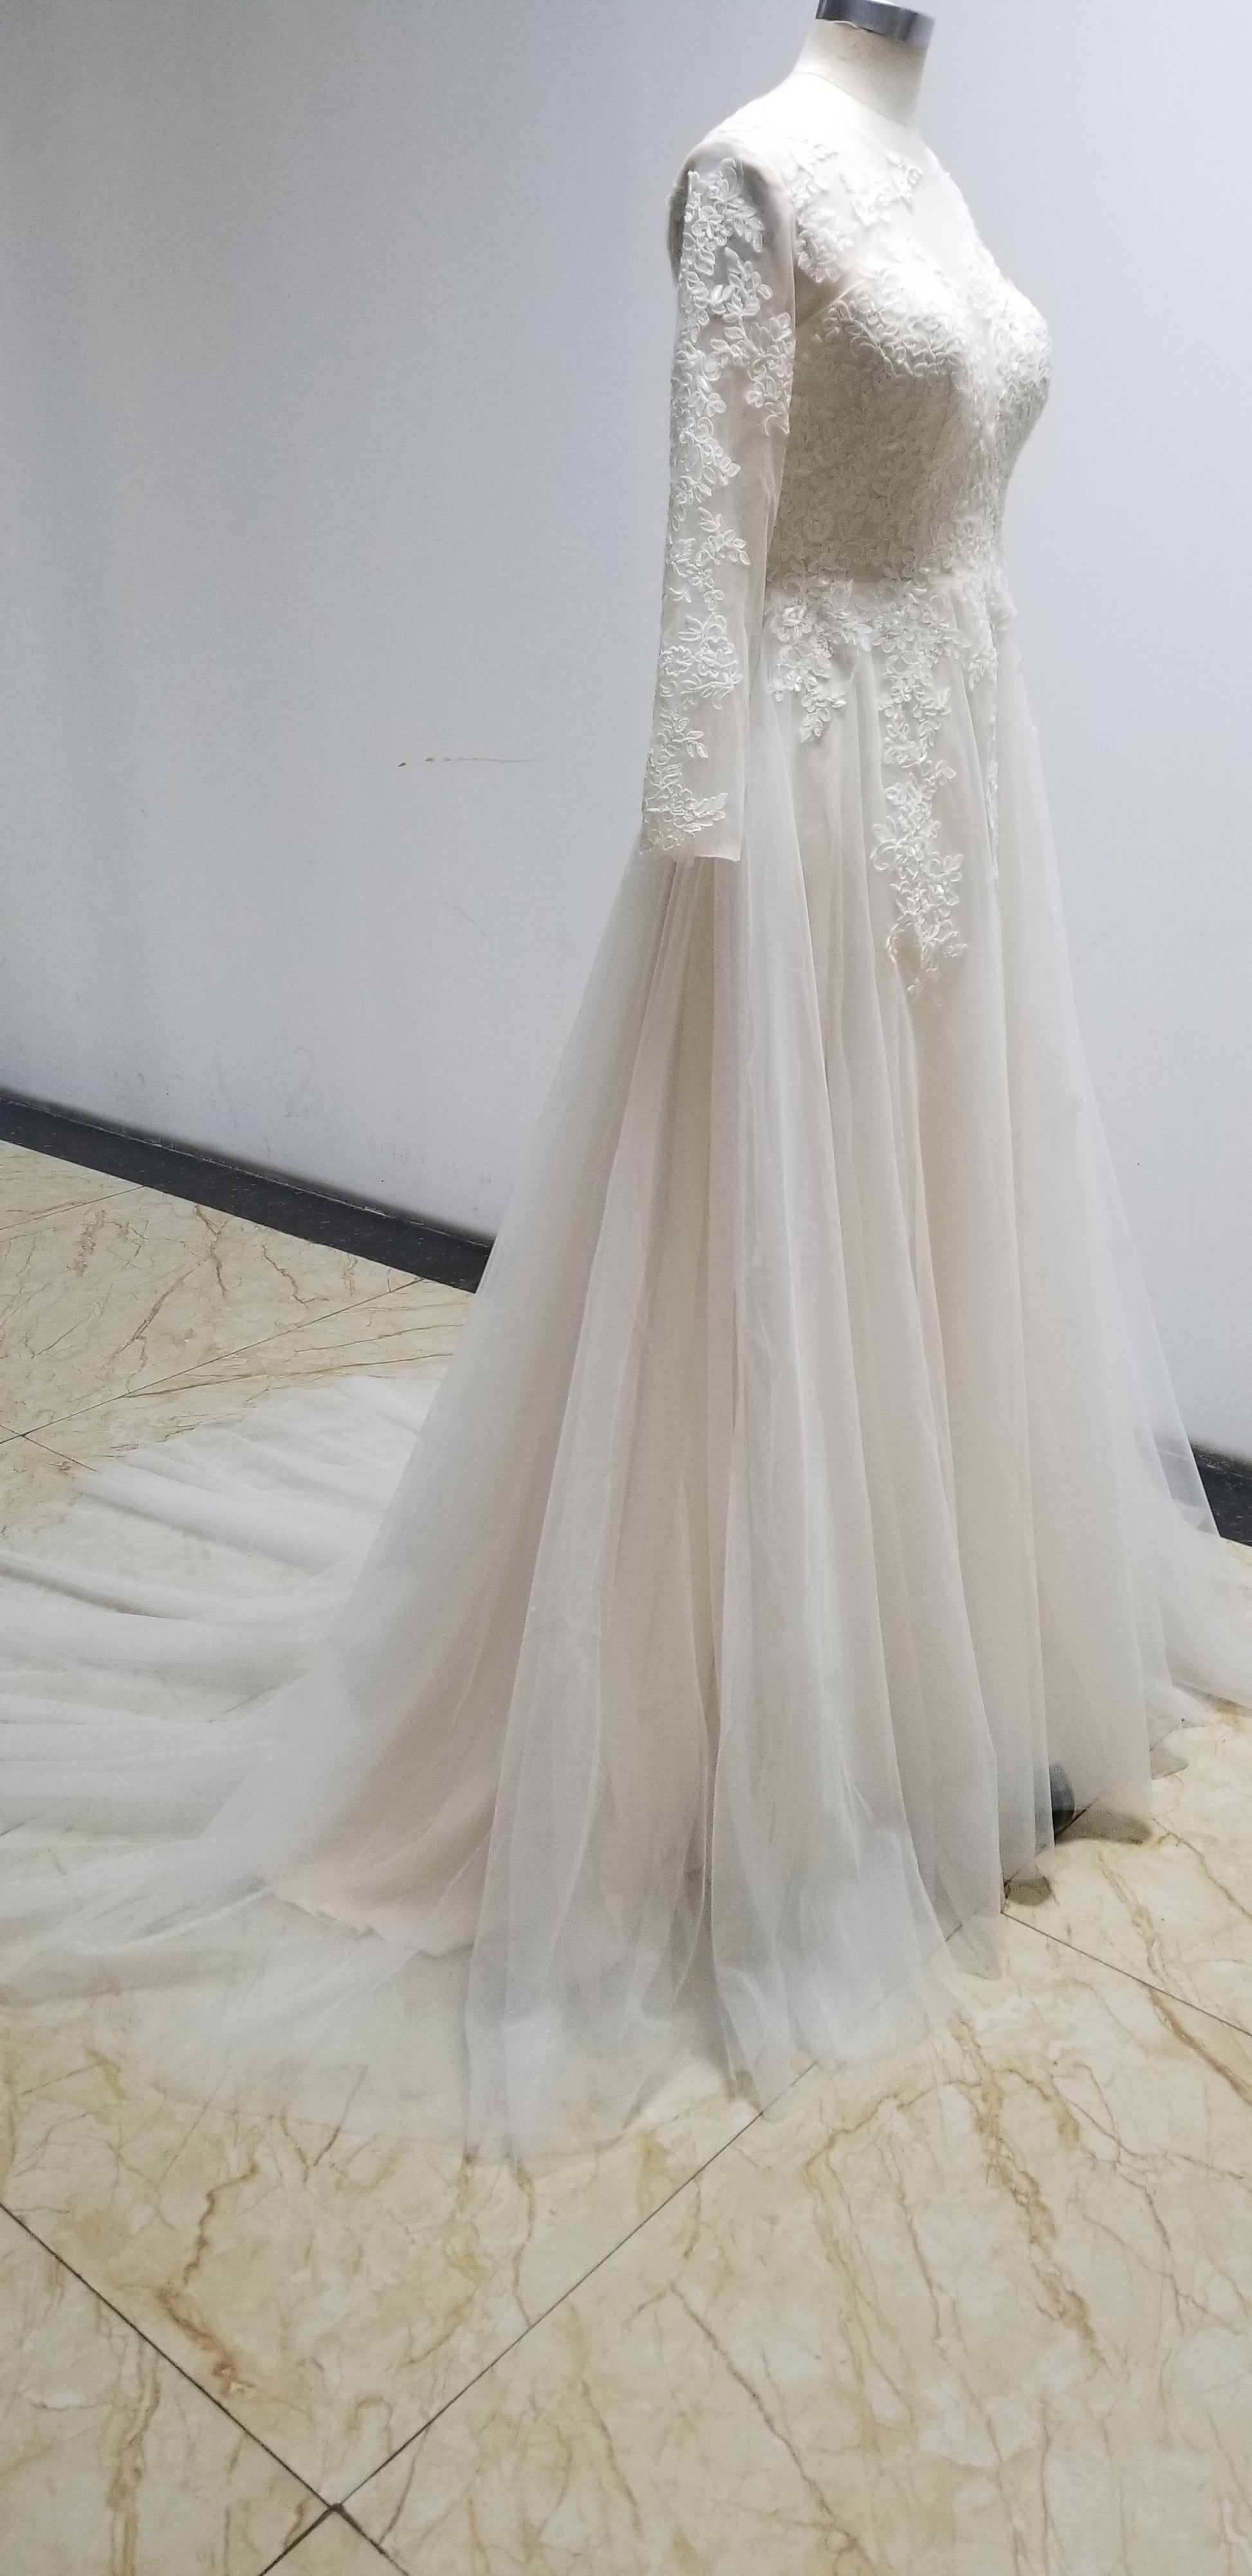 Long Sleeves Tulle A Line Lace Appliques Bridal Wedding Gowns Lace Up Vestido De Noiva Back Button Floor Length Wedding Dress The Clothing Company Sydney